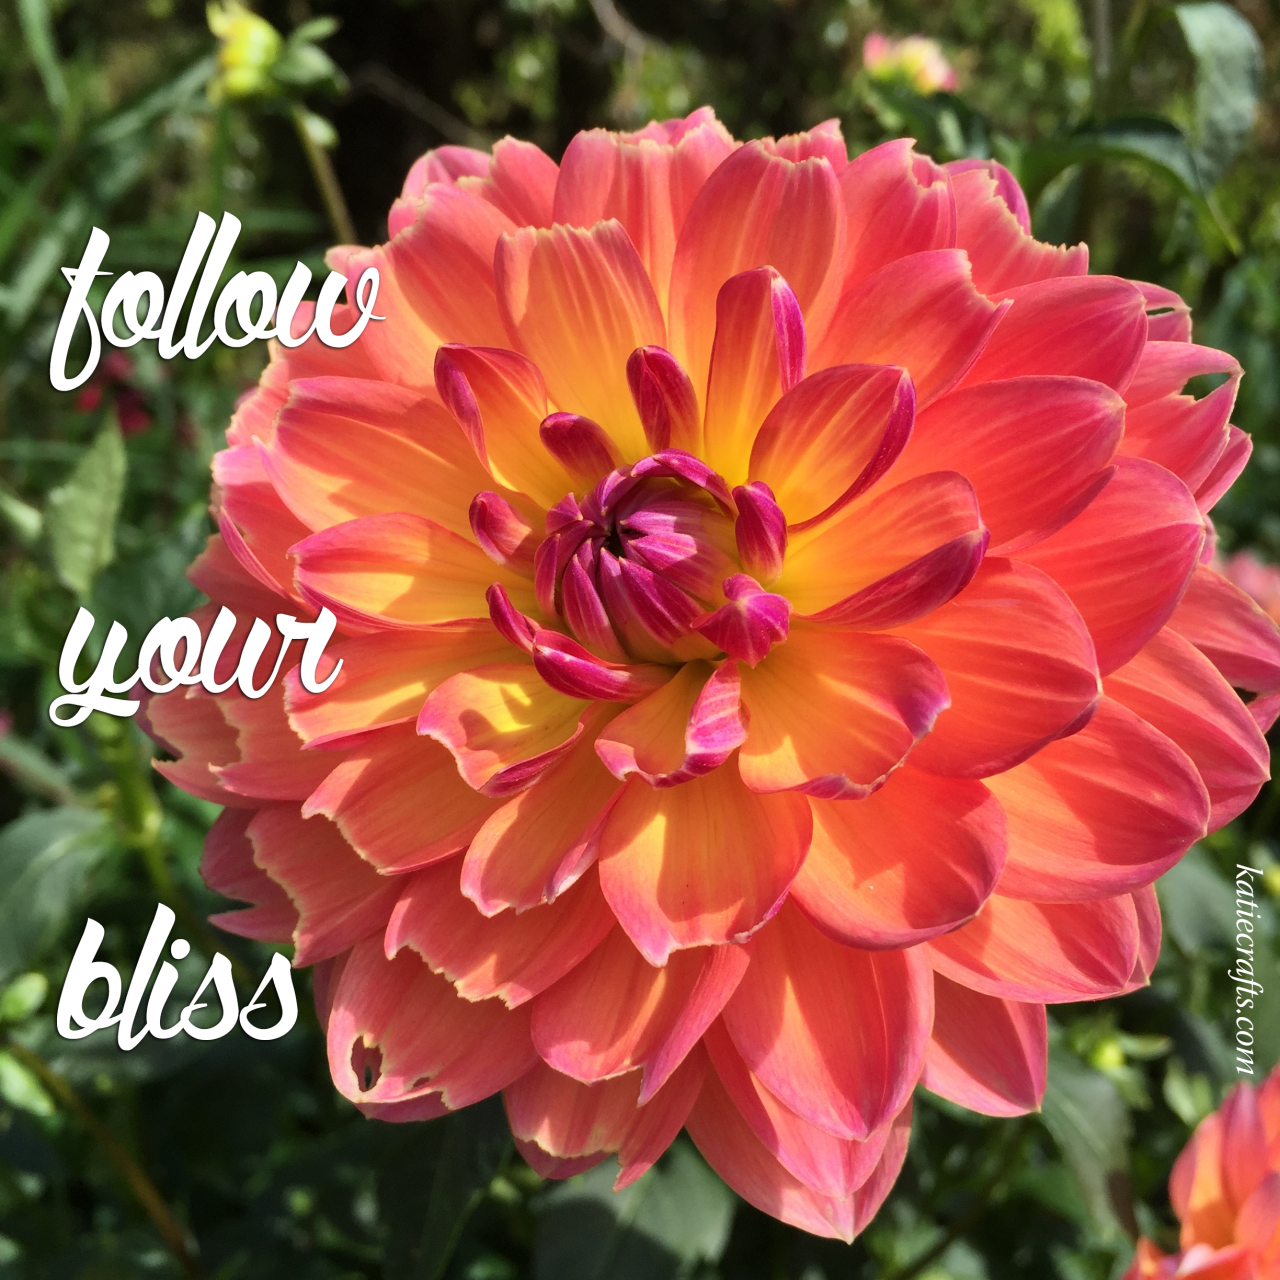 Words for Wednesday: Follow Your Bliss on Katie Crafts; https://www.katiecrafts.com